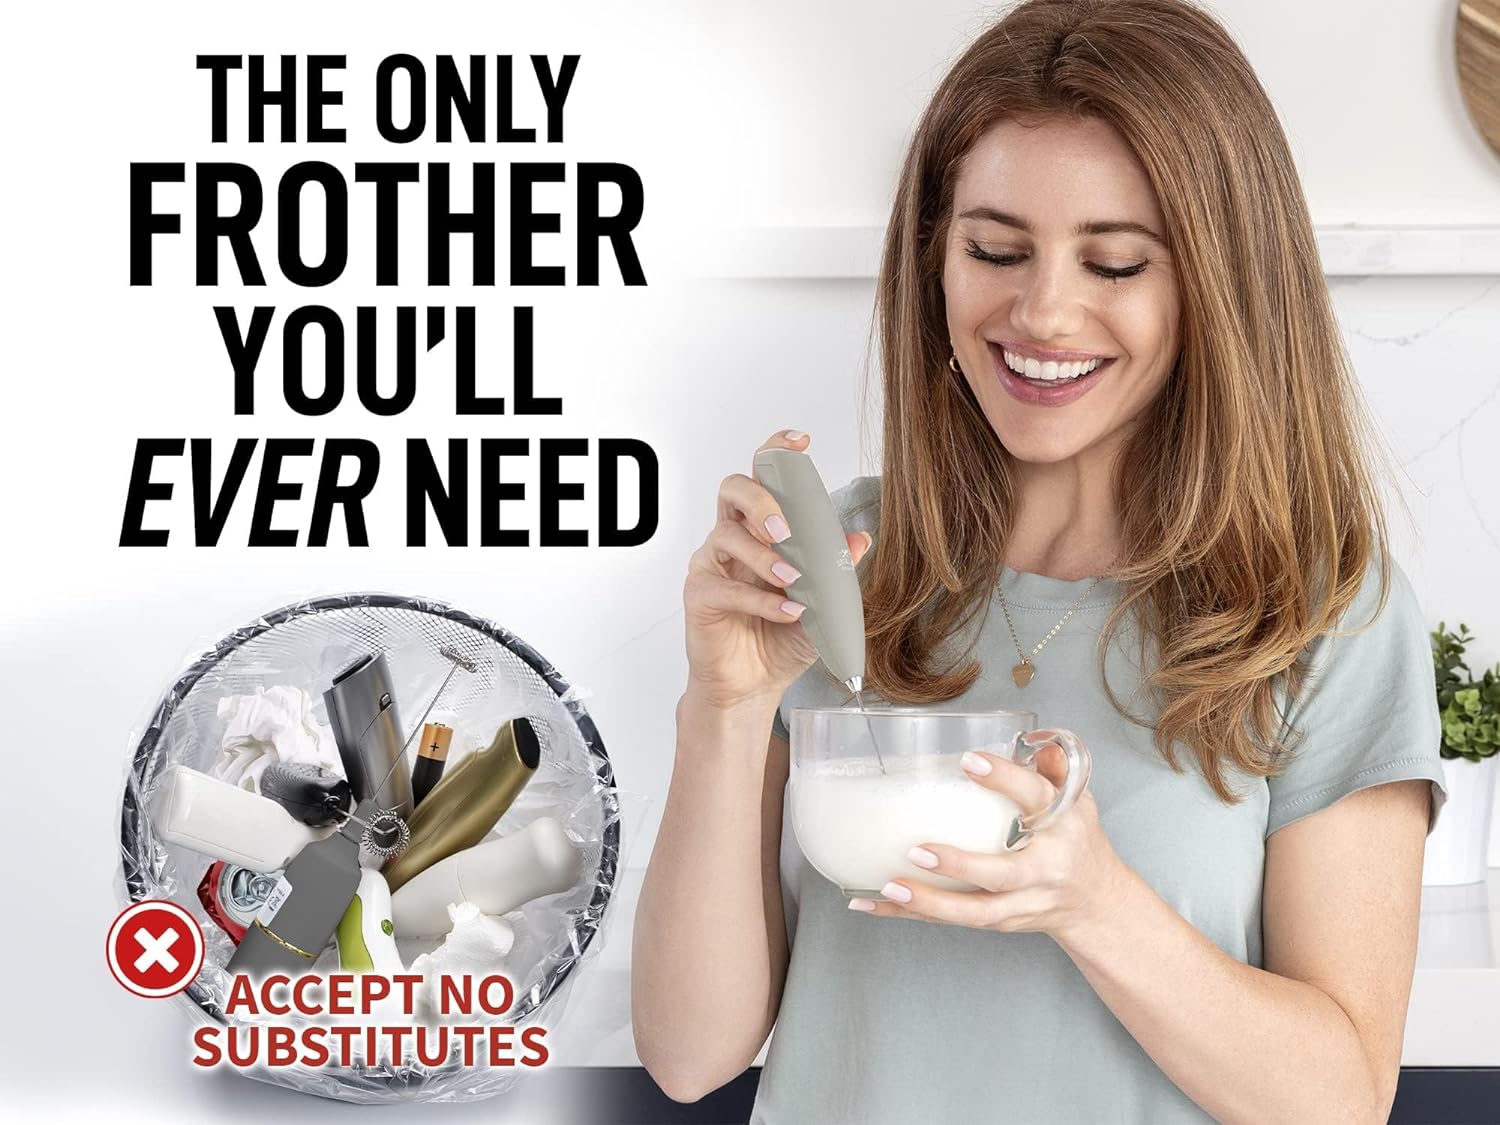 Can You Use A Milk Frother To Mix Protein Powder? - Nine Calories